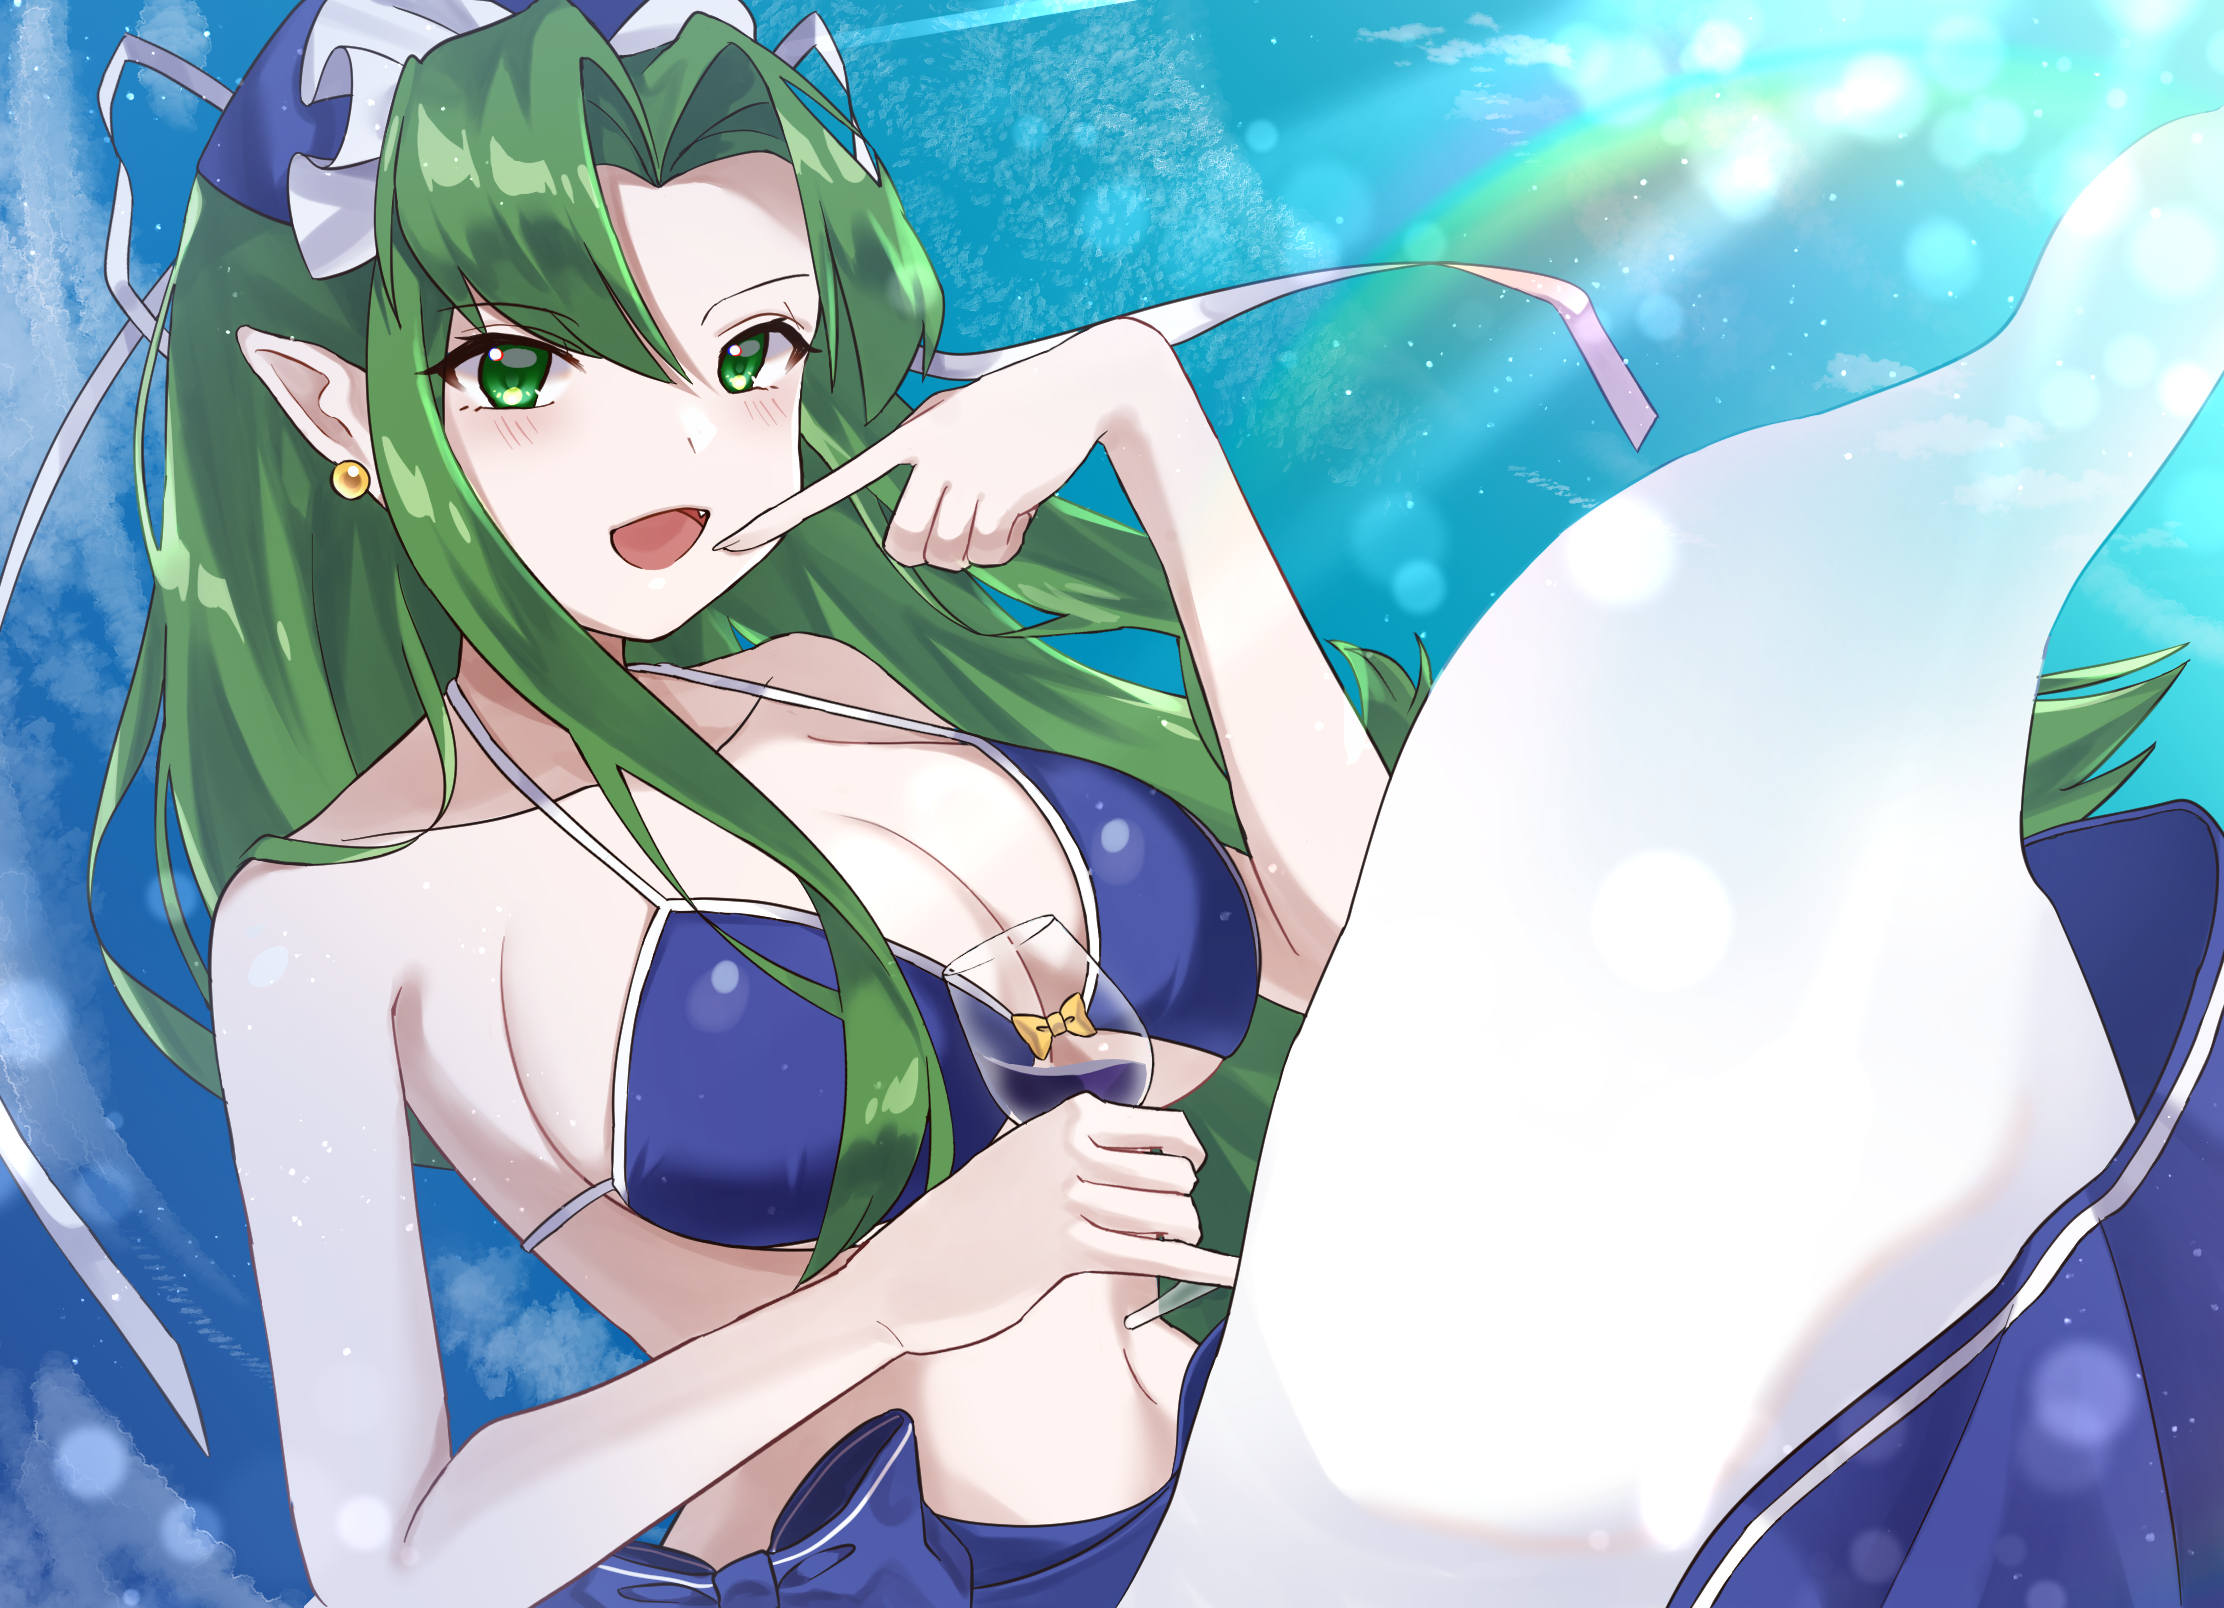 Smiling Mima in a bikini with a glass of wine, showing off her tail